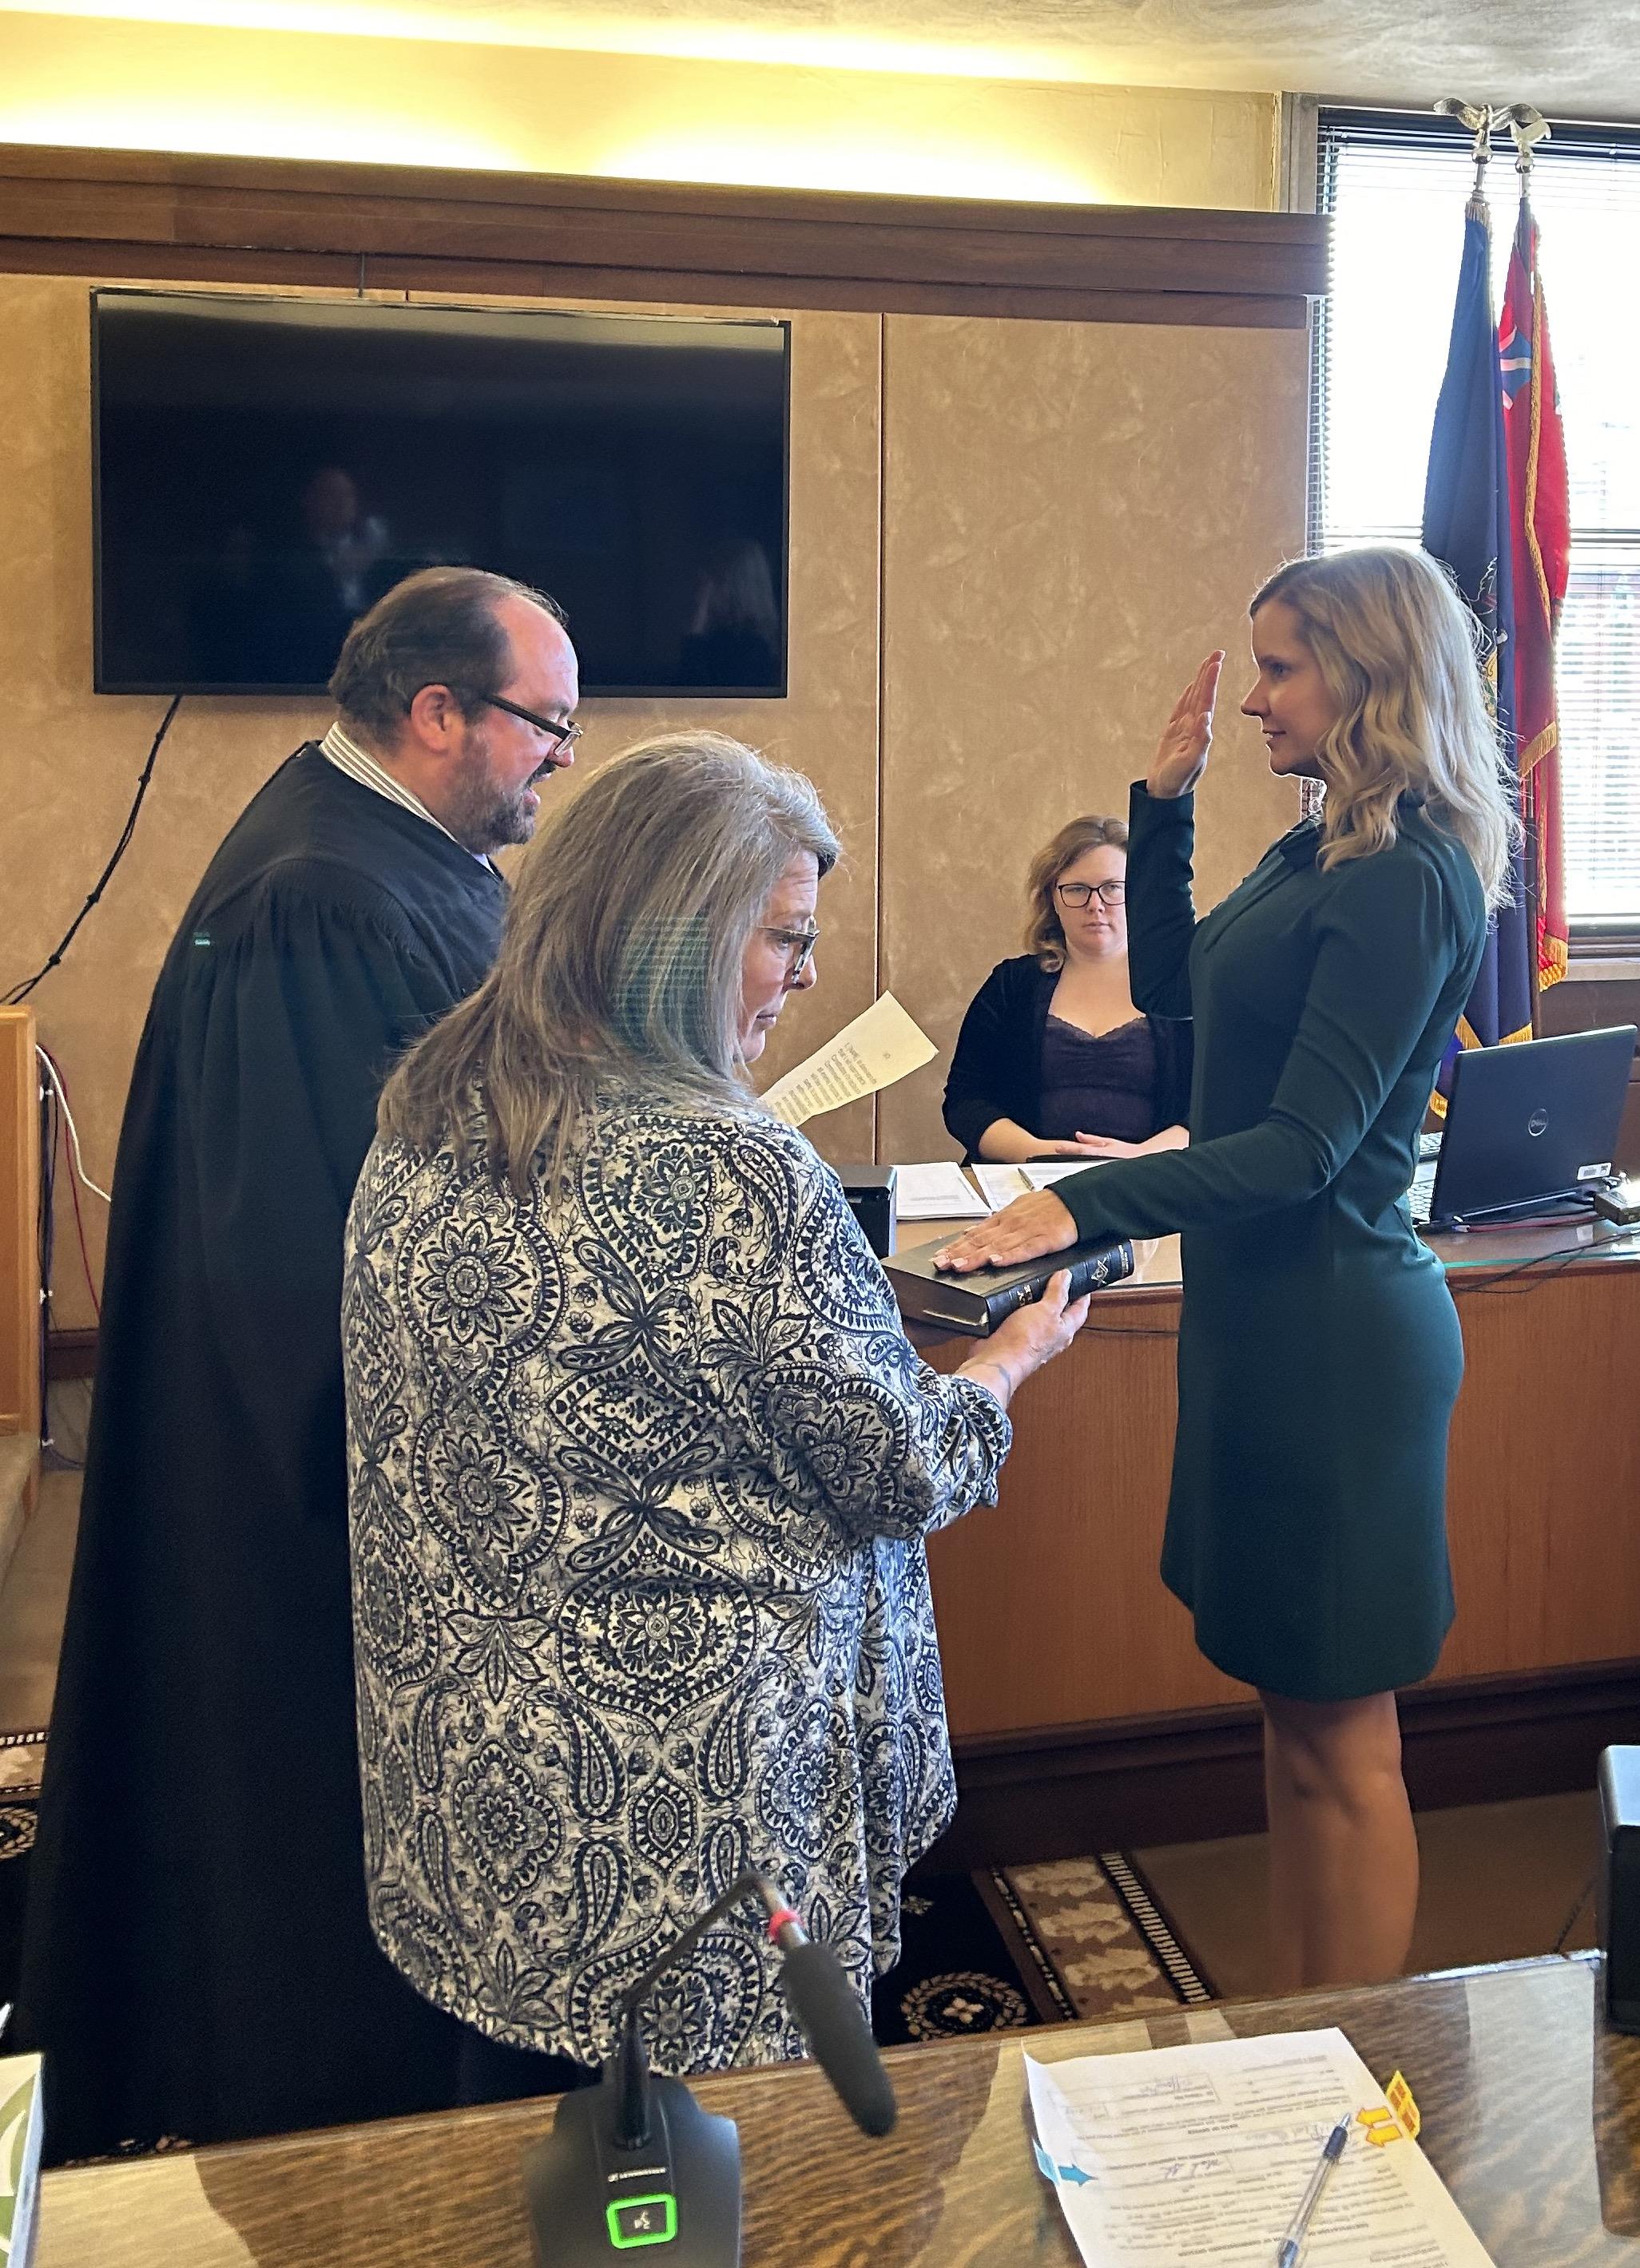 Dr. Tiffany Nix (right) received the oath of office from Judge Harry F. Smail, Jr.